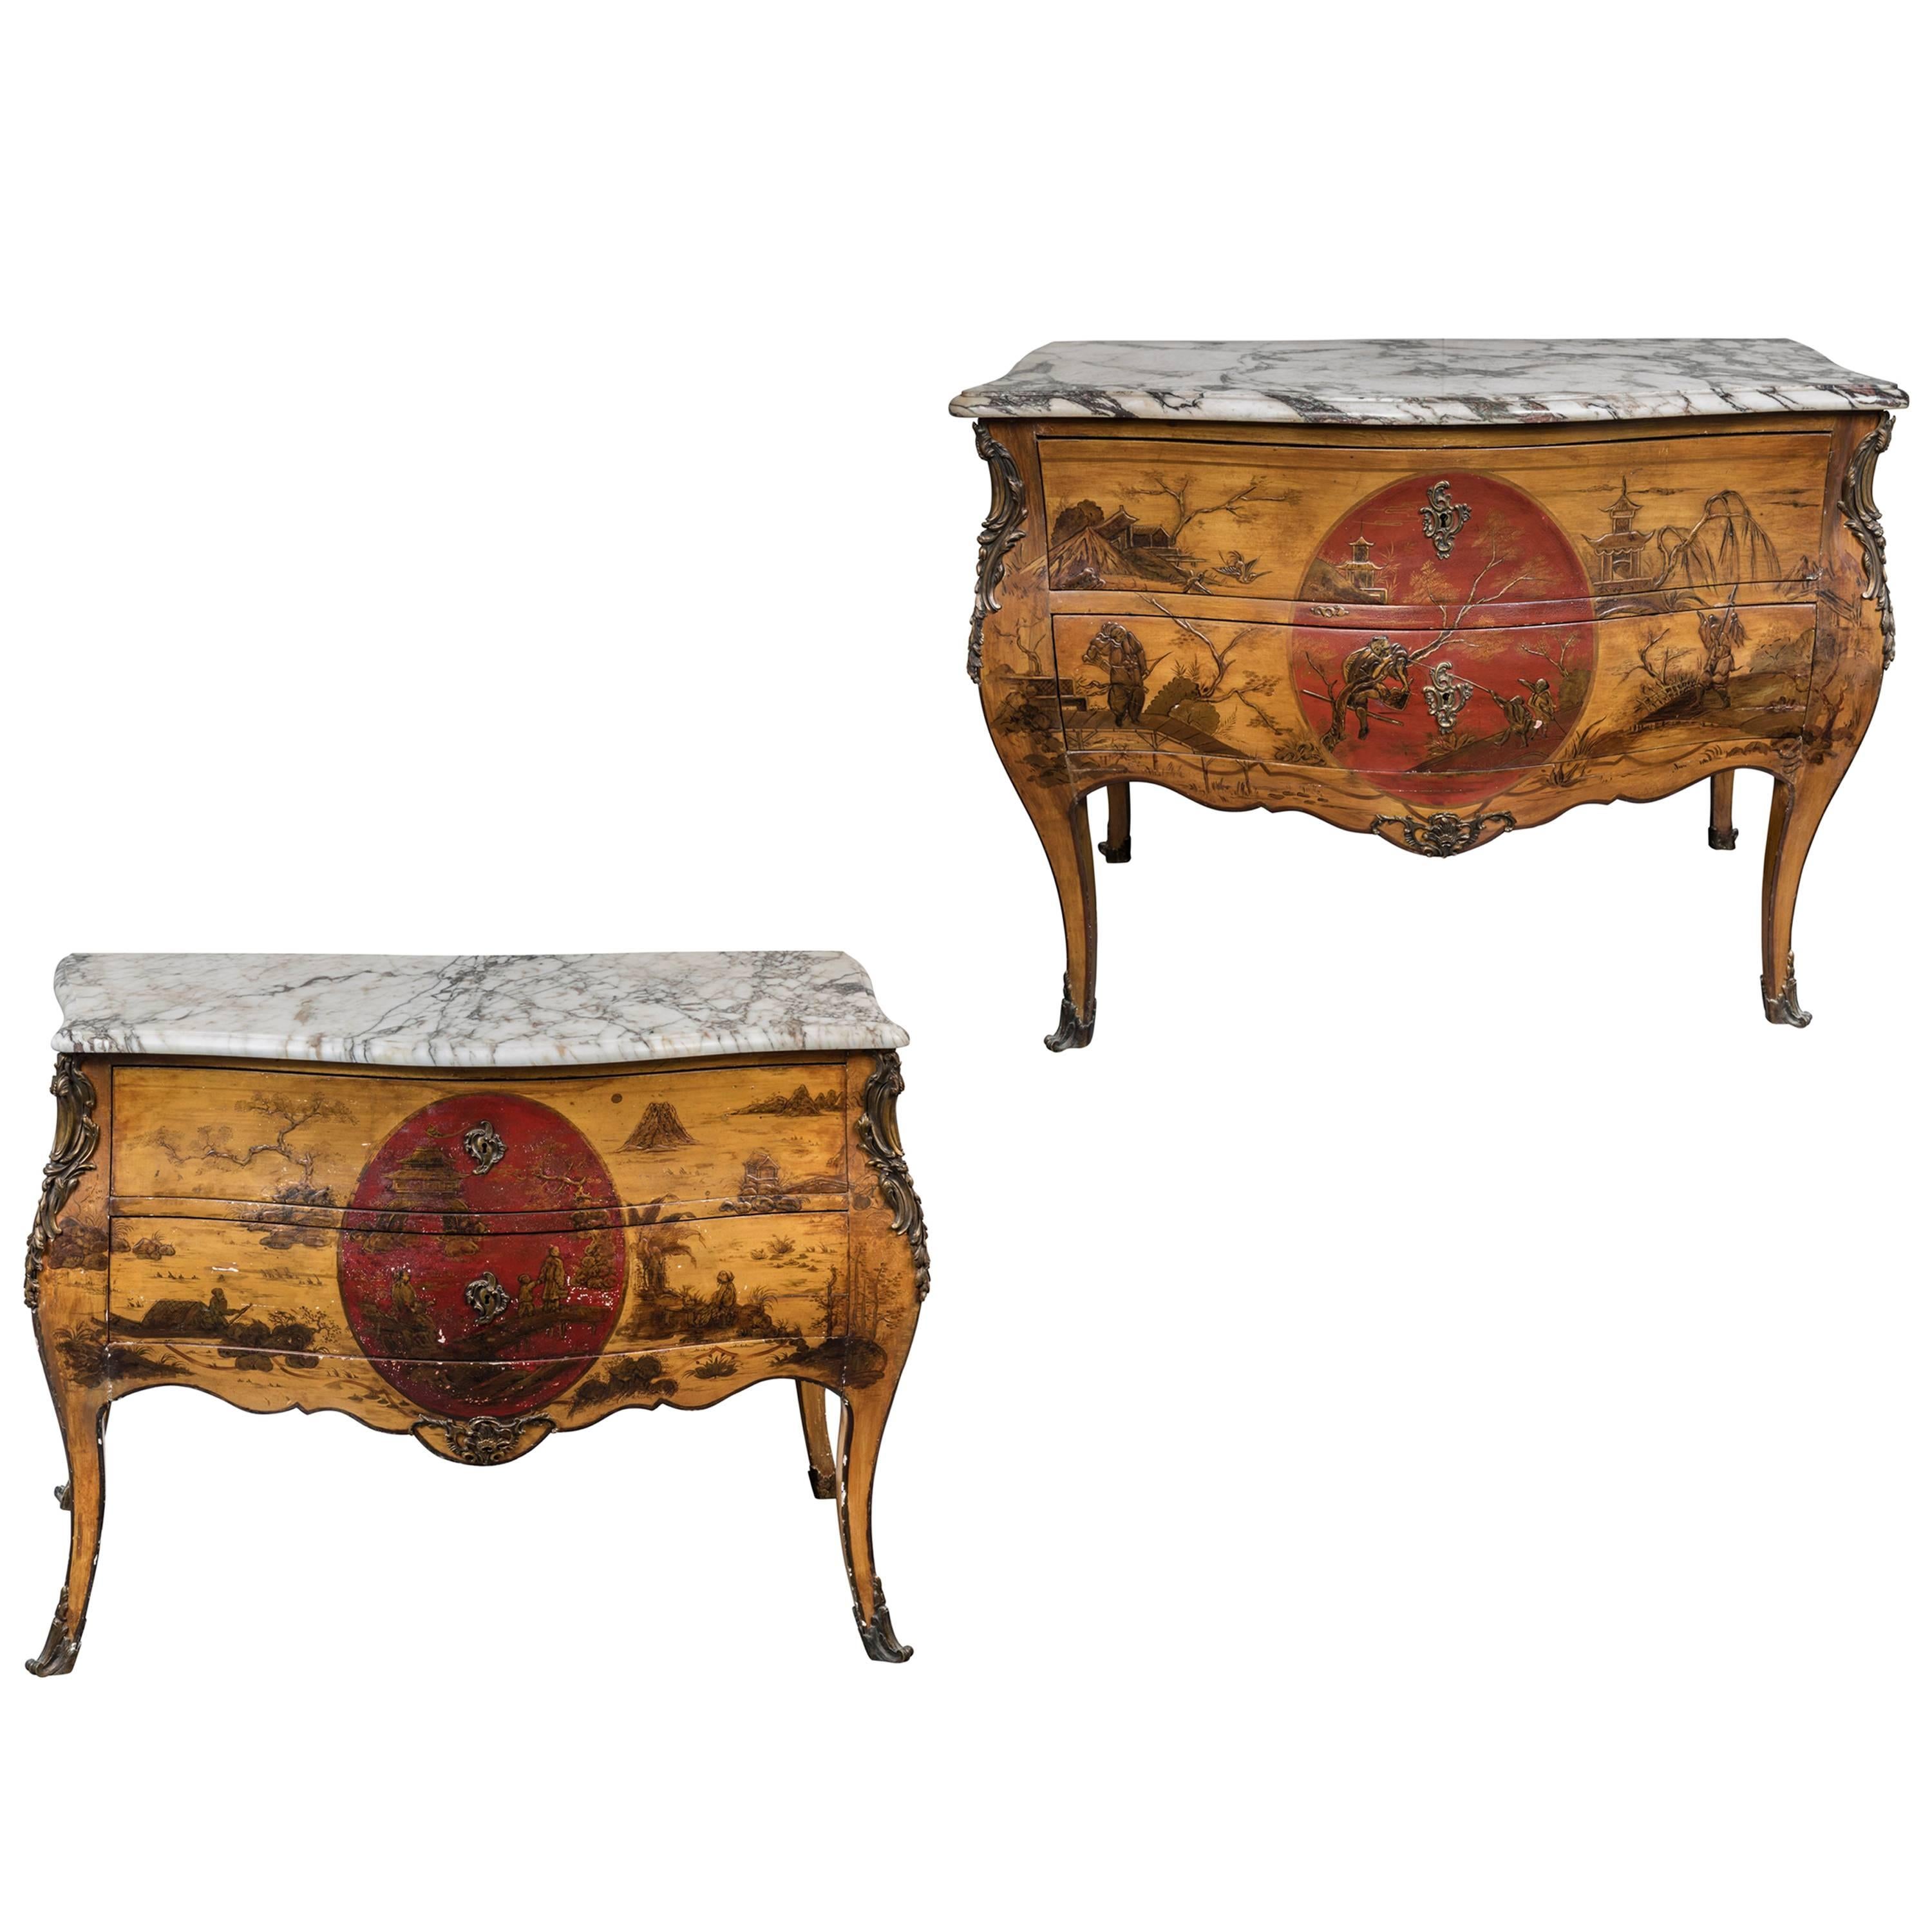 Rare, Turn-of-the-Century, French, Japanned Commodes